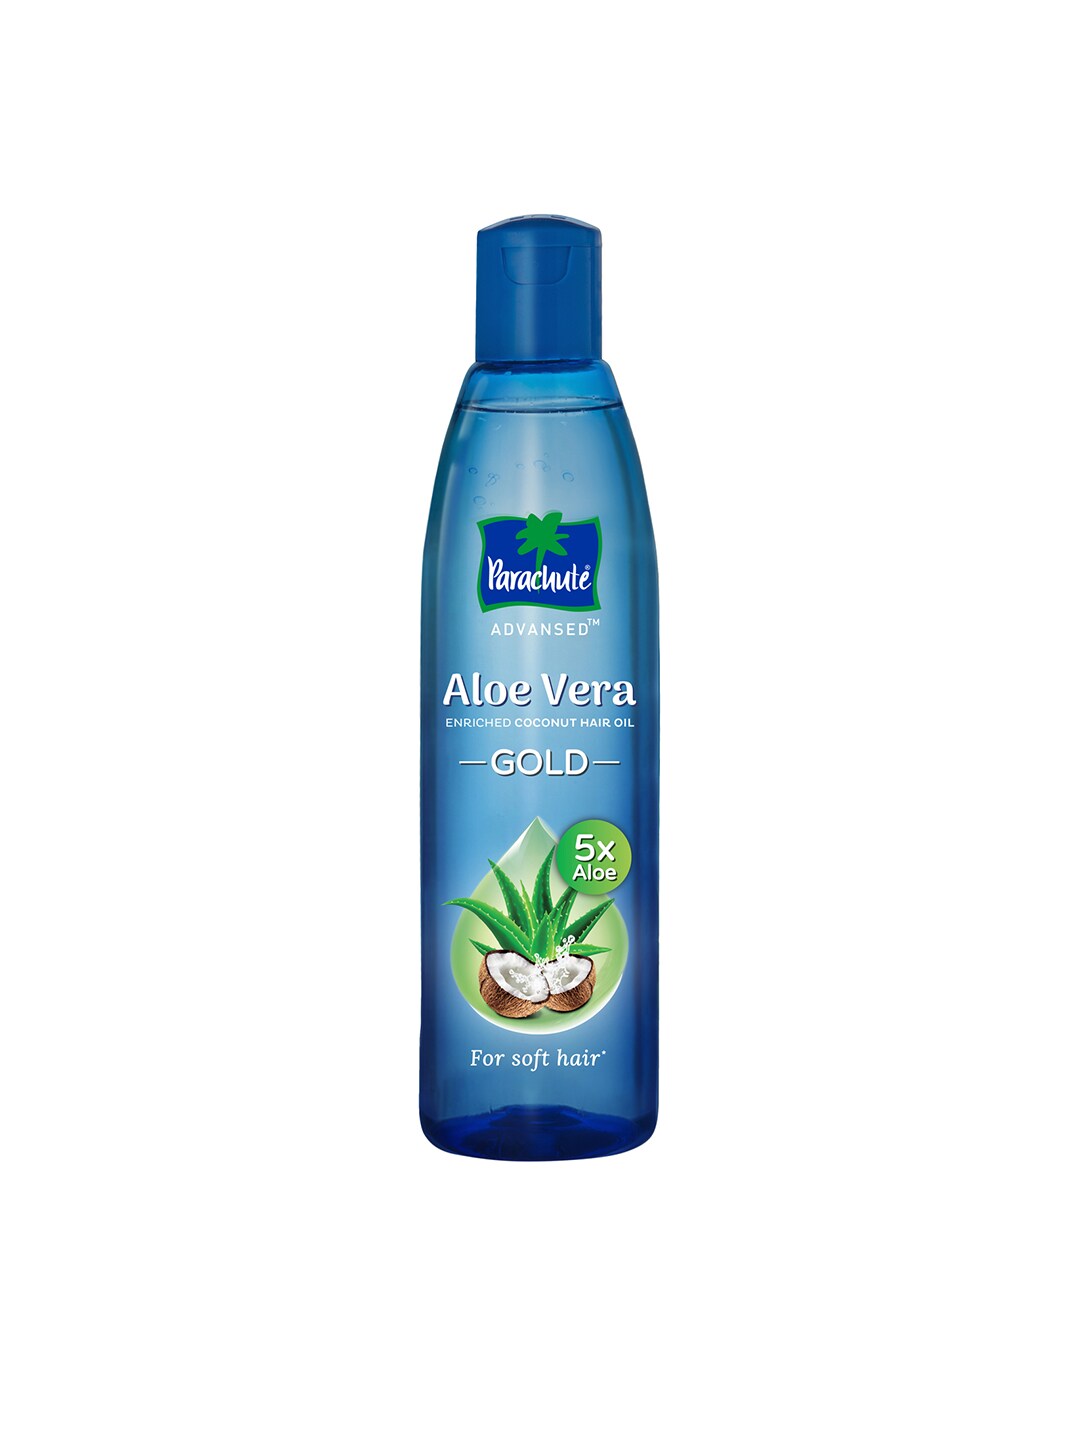 Parachute Advansed Aloe Vera Enriched Coconut Hair Oil - 250ml Price in India